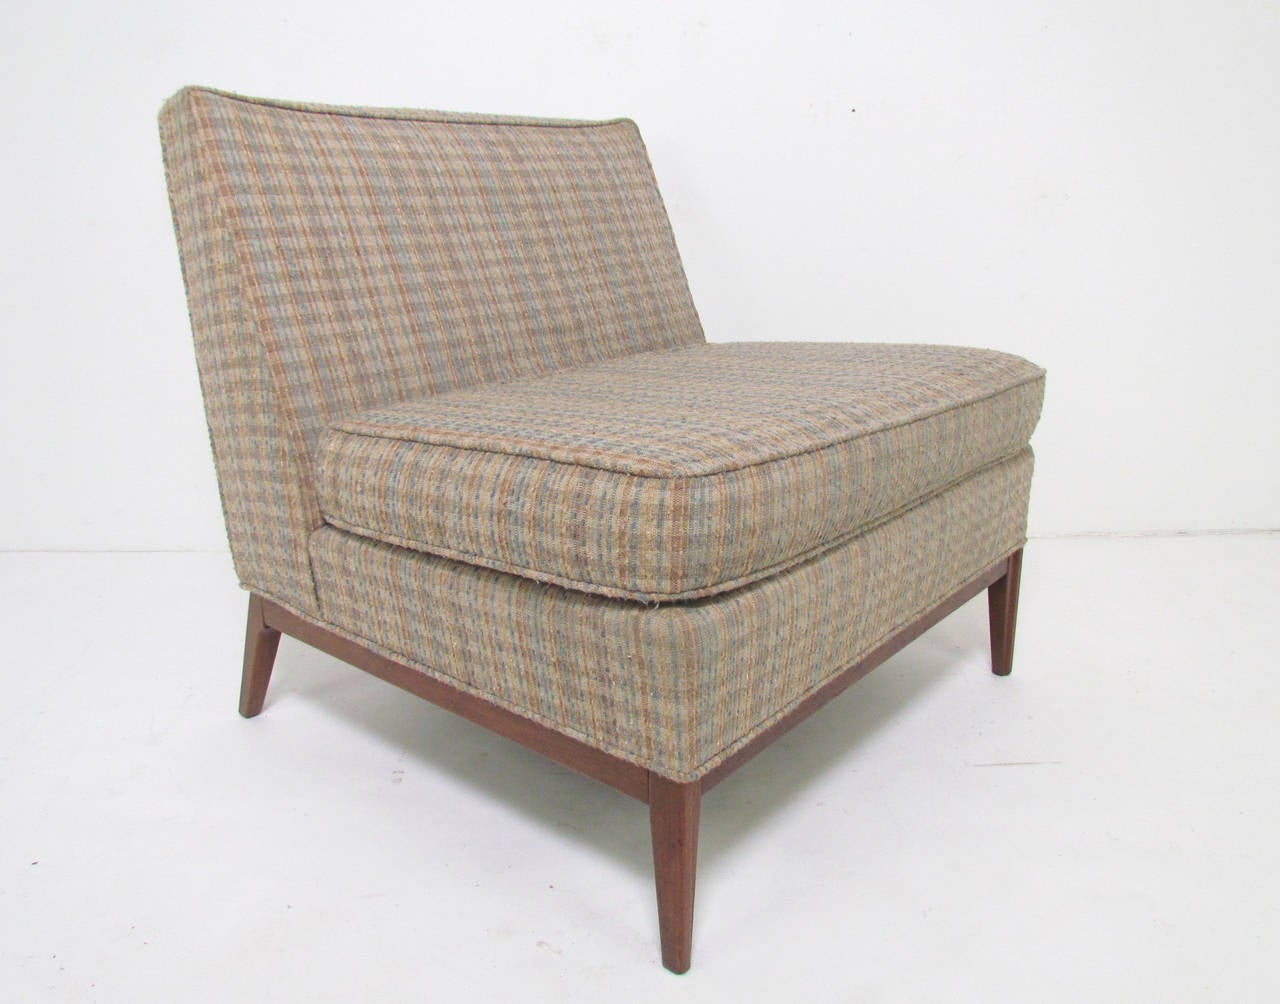 Generously proportioned Mid-Century Modern slipper lounge chair with walnut base attributed to Paul McCobb, circa 1960s.